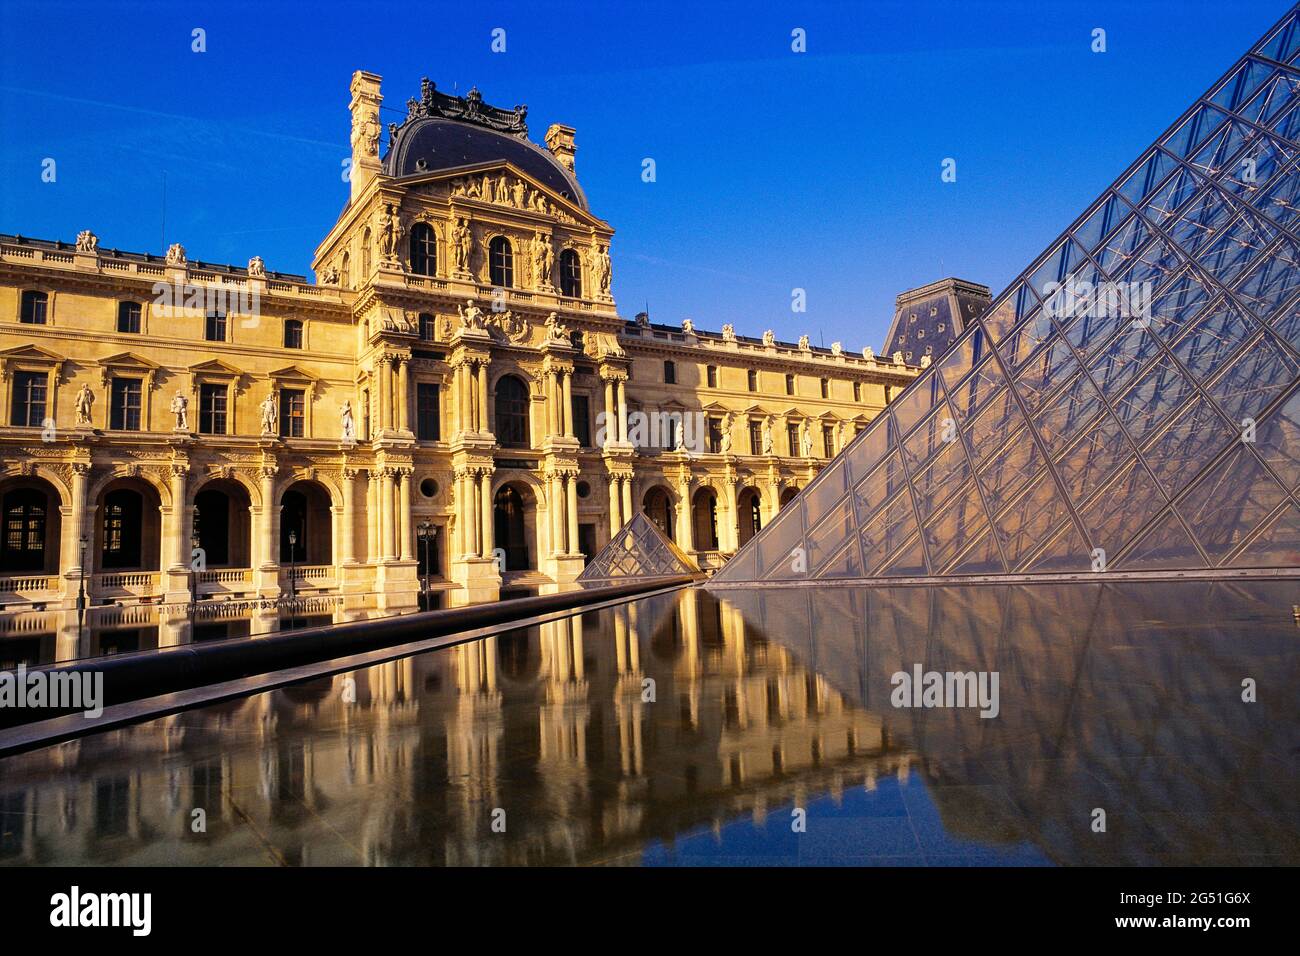 Louvre Museum and pyramid under clear sky, Paris, France Stock Photo